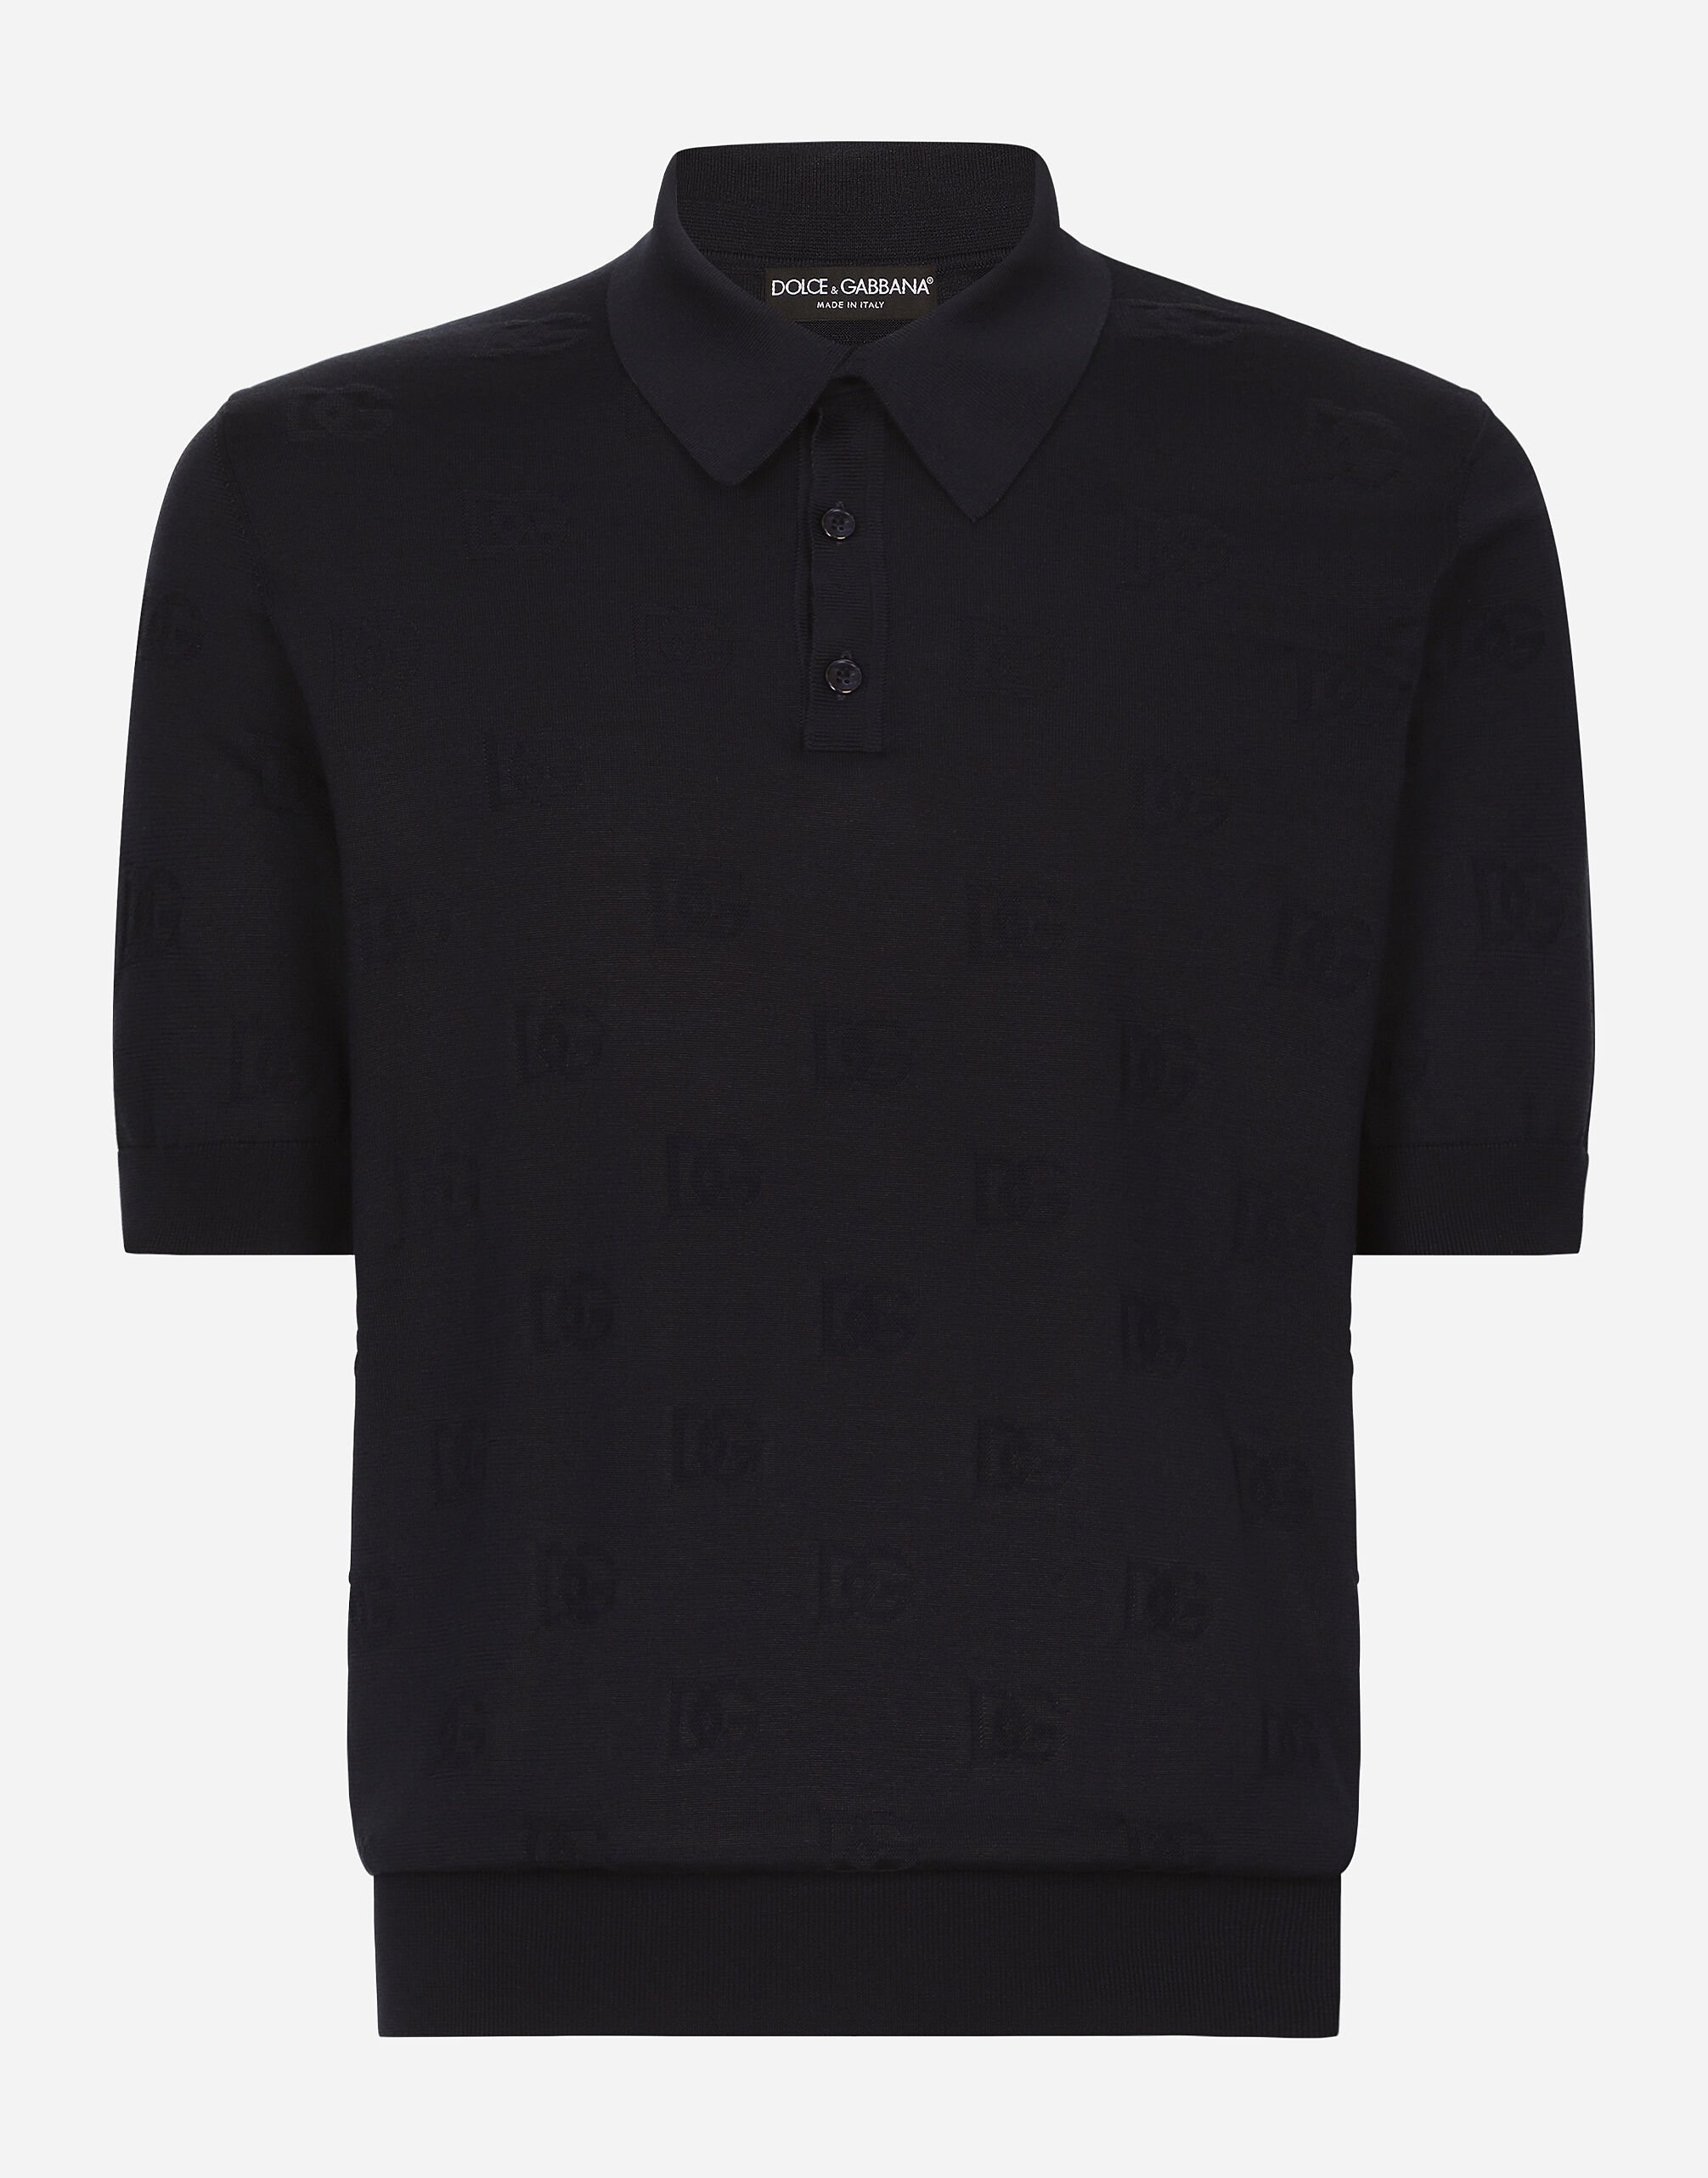 Dolce & Gabbana Silk polo-shirt with all-over DG logo embroidery White GVUZATG7K4T